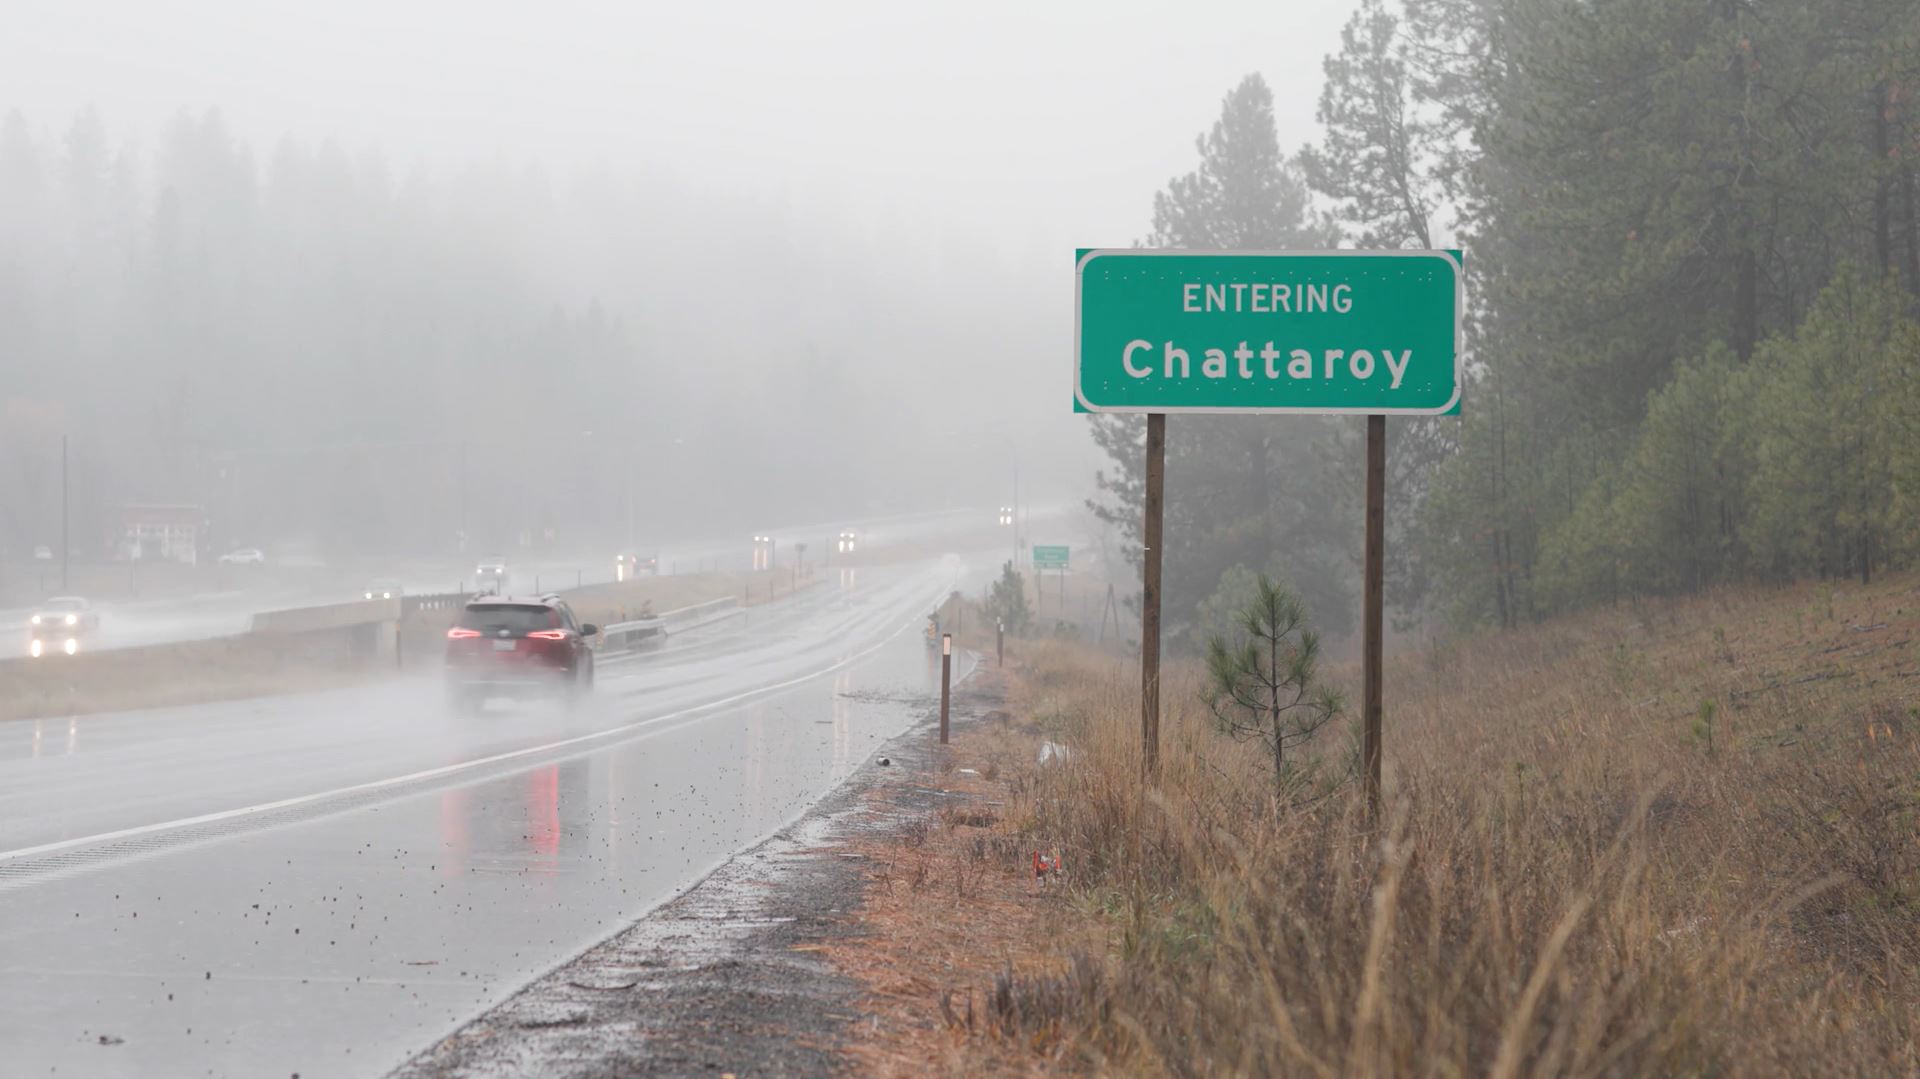 The entering Chattaroy sign by the highway.